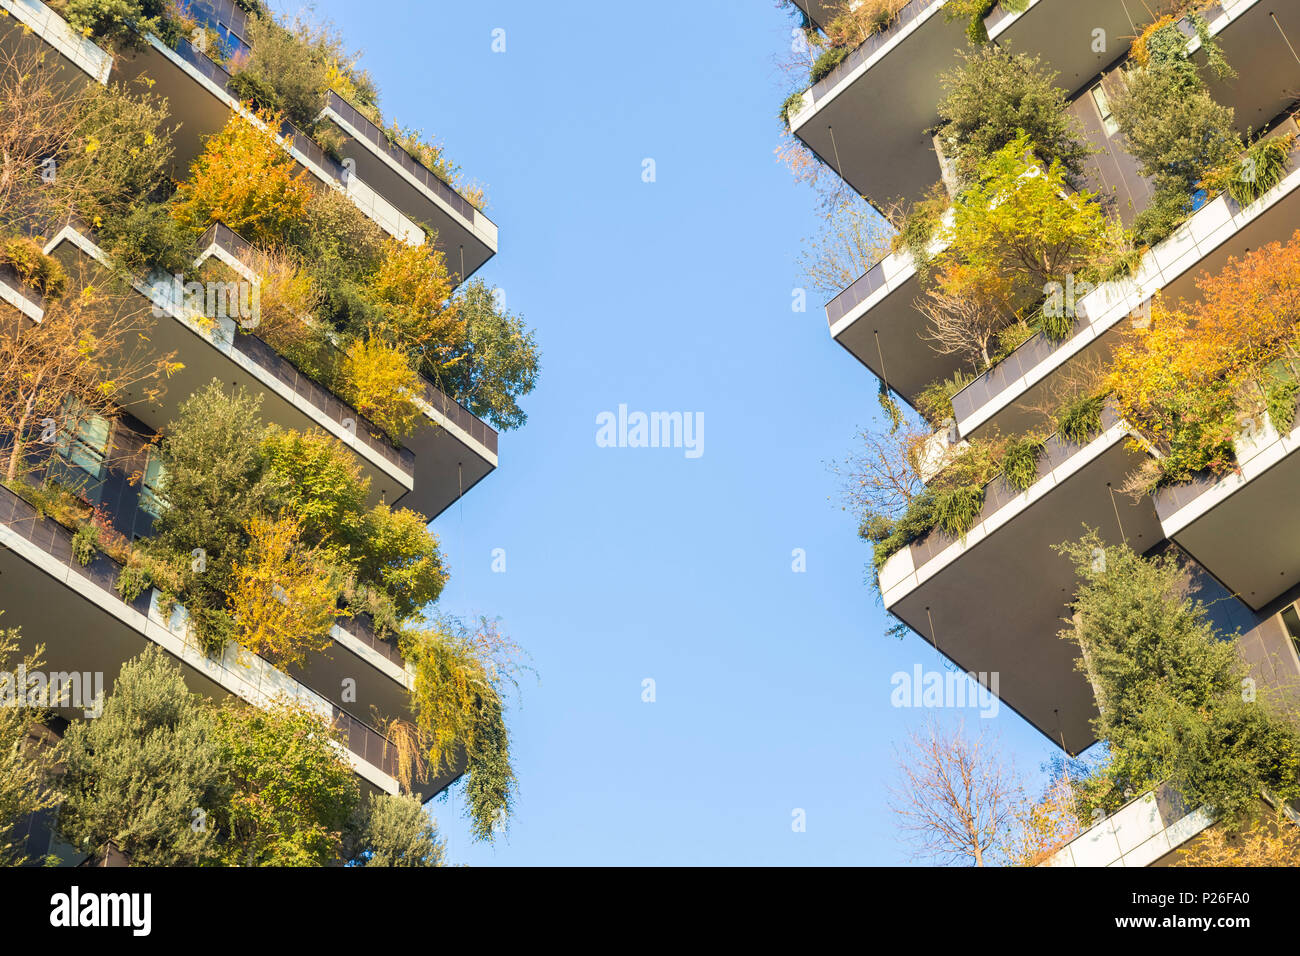 View of the Bosco Verticale skyscrapers in Porta Nuova neighborhood. Milan, Lombardy, Italy. Stock Photo